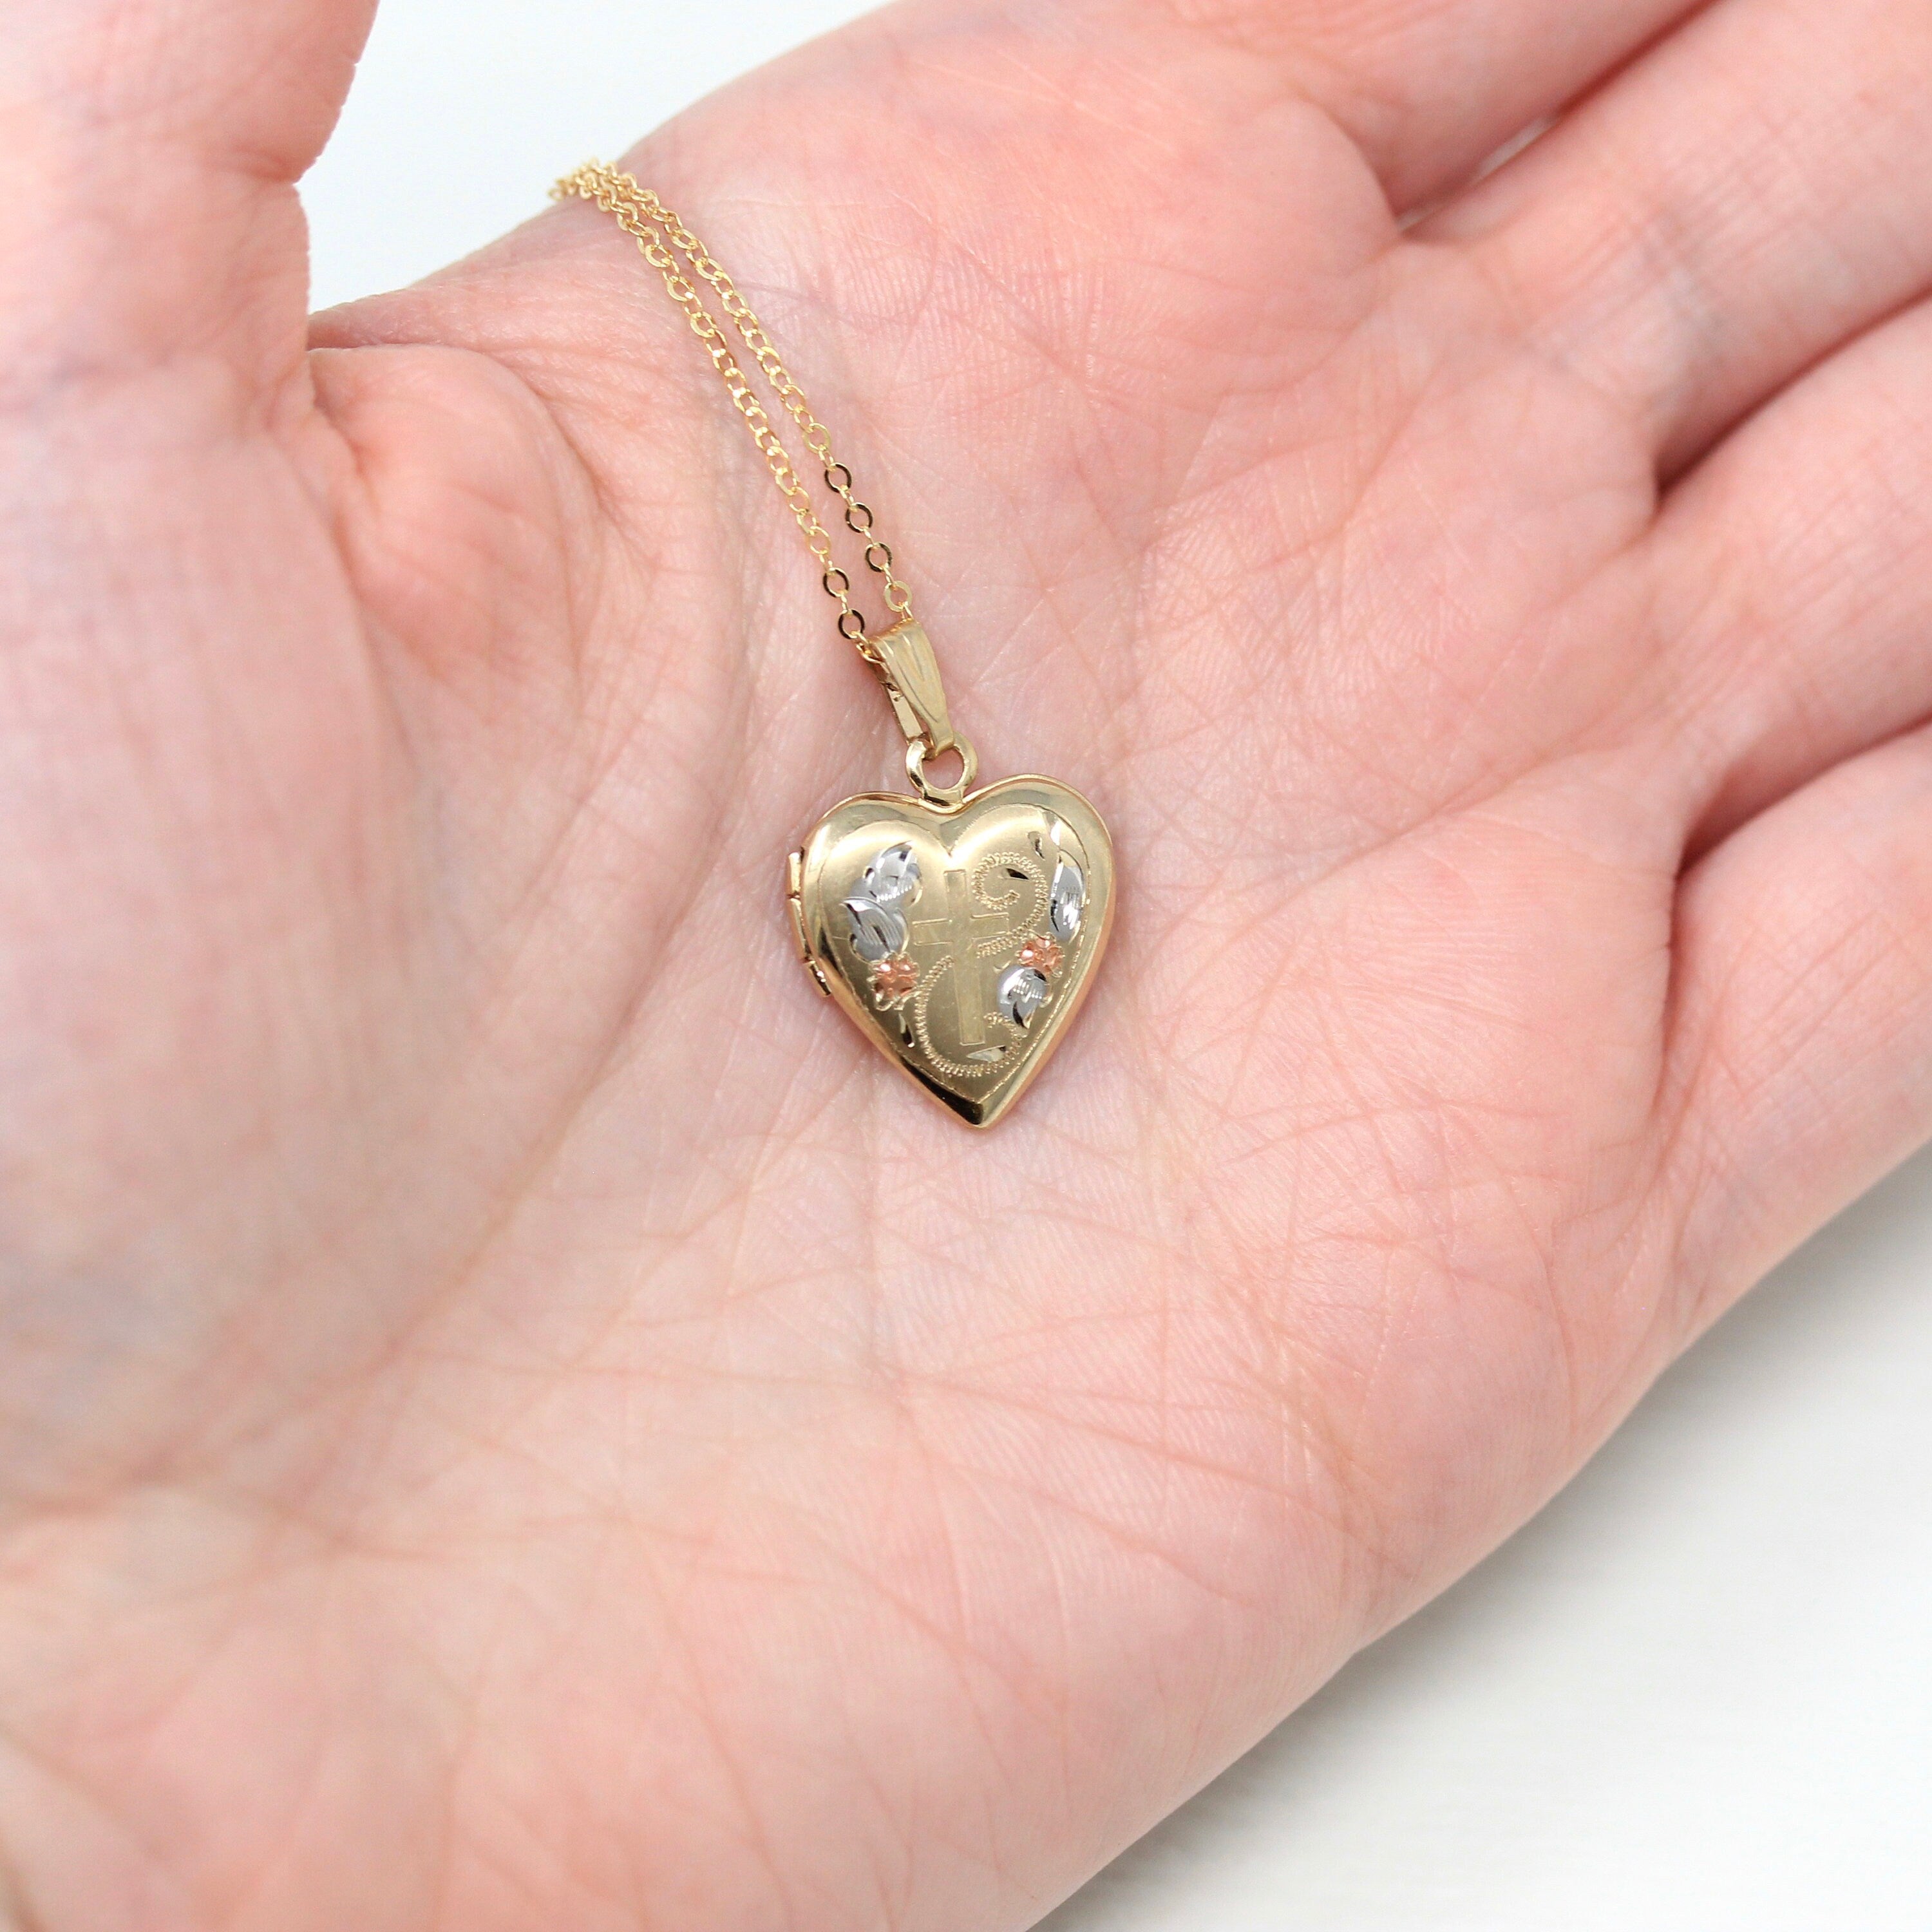 Solid 14K Gold Heart Photo Locket 3-panel by PPC With Engraving & White Gold  Accent Top Comes on 14K Italy 2mm Wide Wheat Chain, 11.3g Total - Etsy